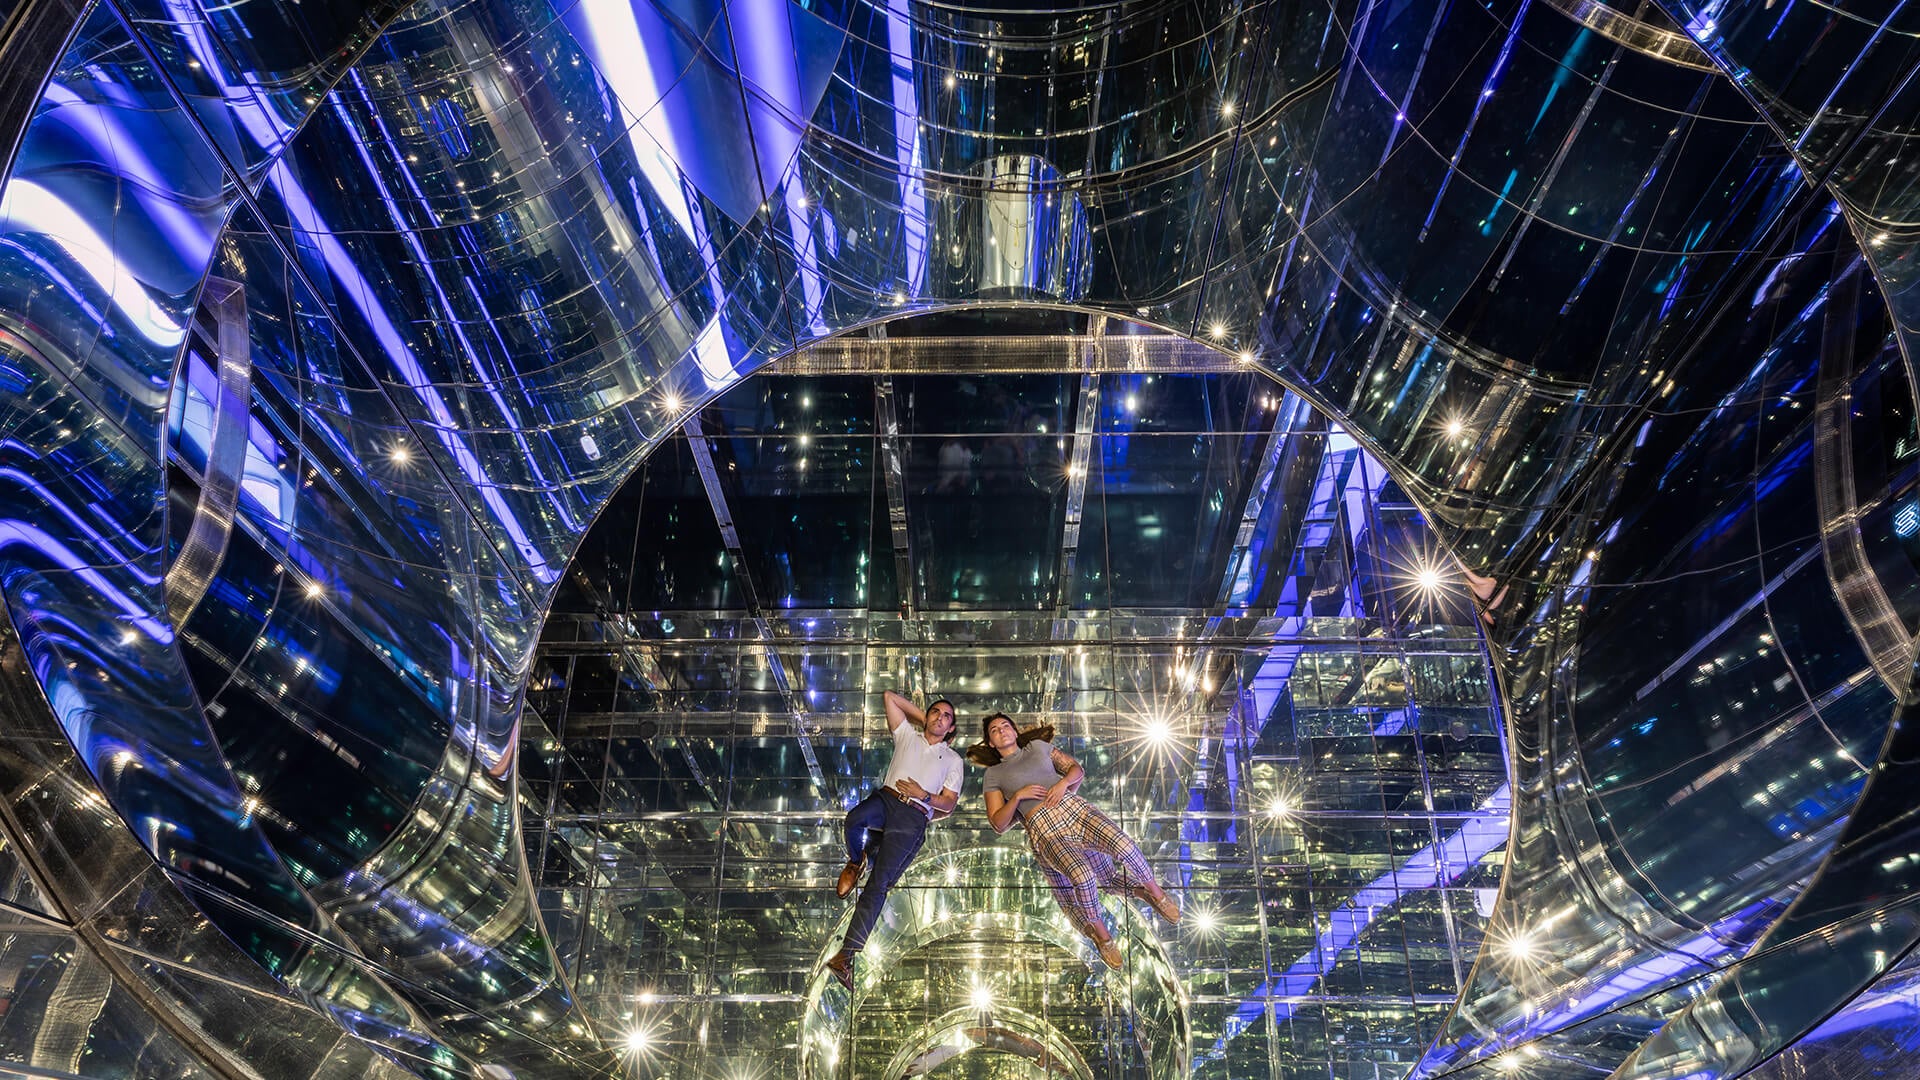 Two individuals floating in a reflective, transformative space illuminated by blue lights, showcasing art and architecture.